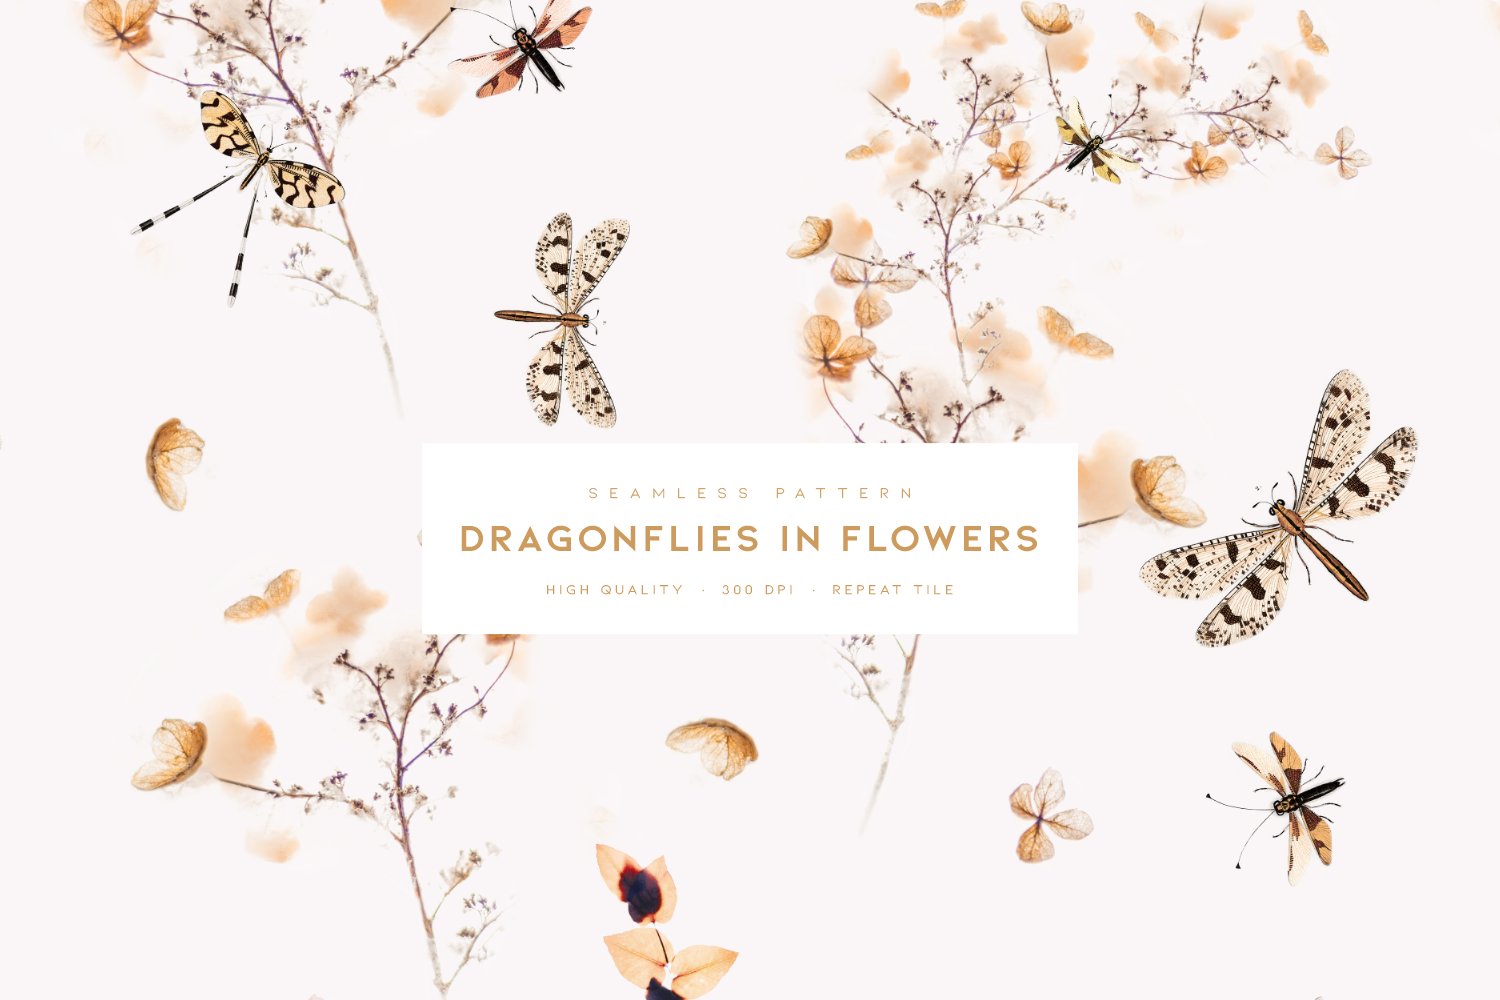 Dragonflies in Flowers cover image.